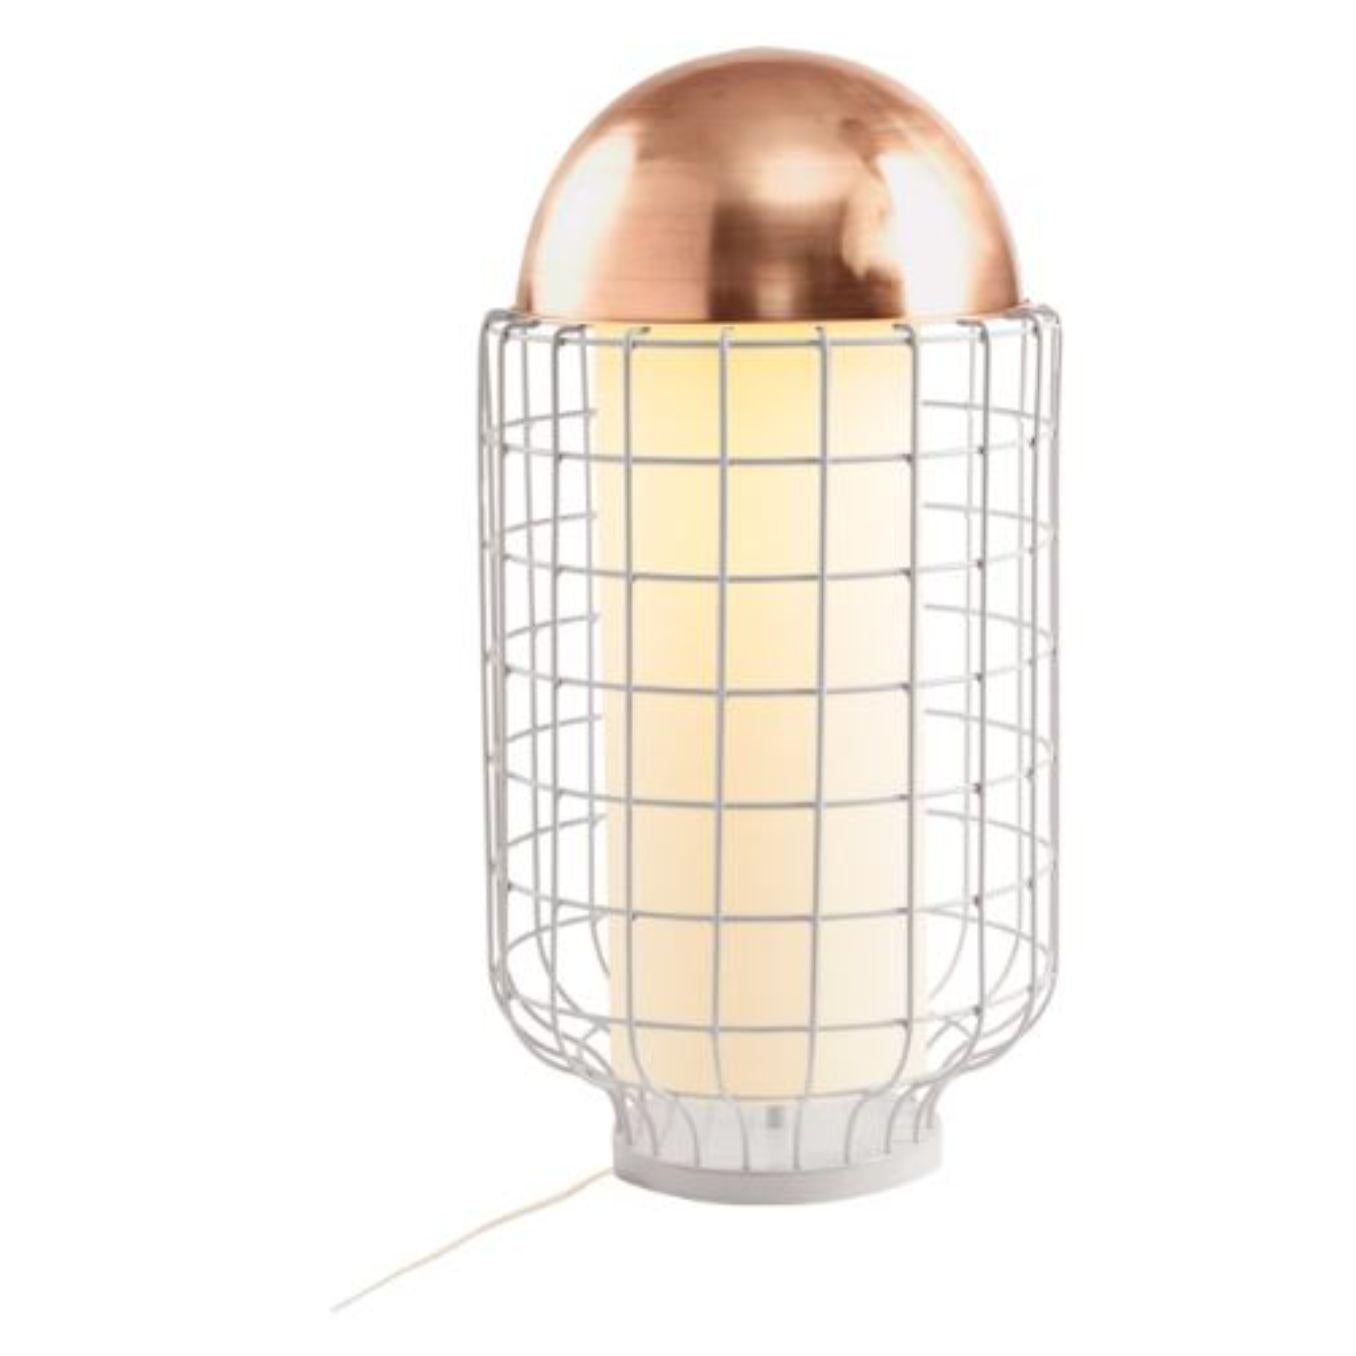 Copper and ivory Magnolia table lamp by Dooq
Dimensions: W 32 x D 32 x H 63 cm
Materials: lacquered metal, polished or brushed metal, copper.
abat-jour: cotton
Also available in different colours and materials.

Information:
230V/50Hz
E27/1x10W